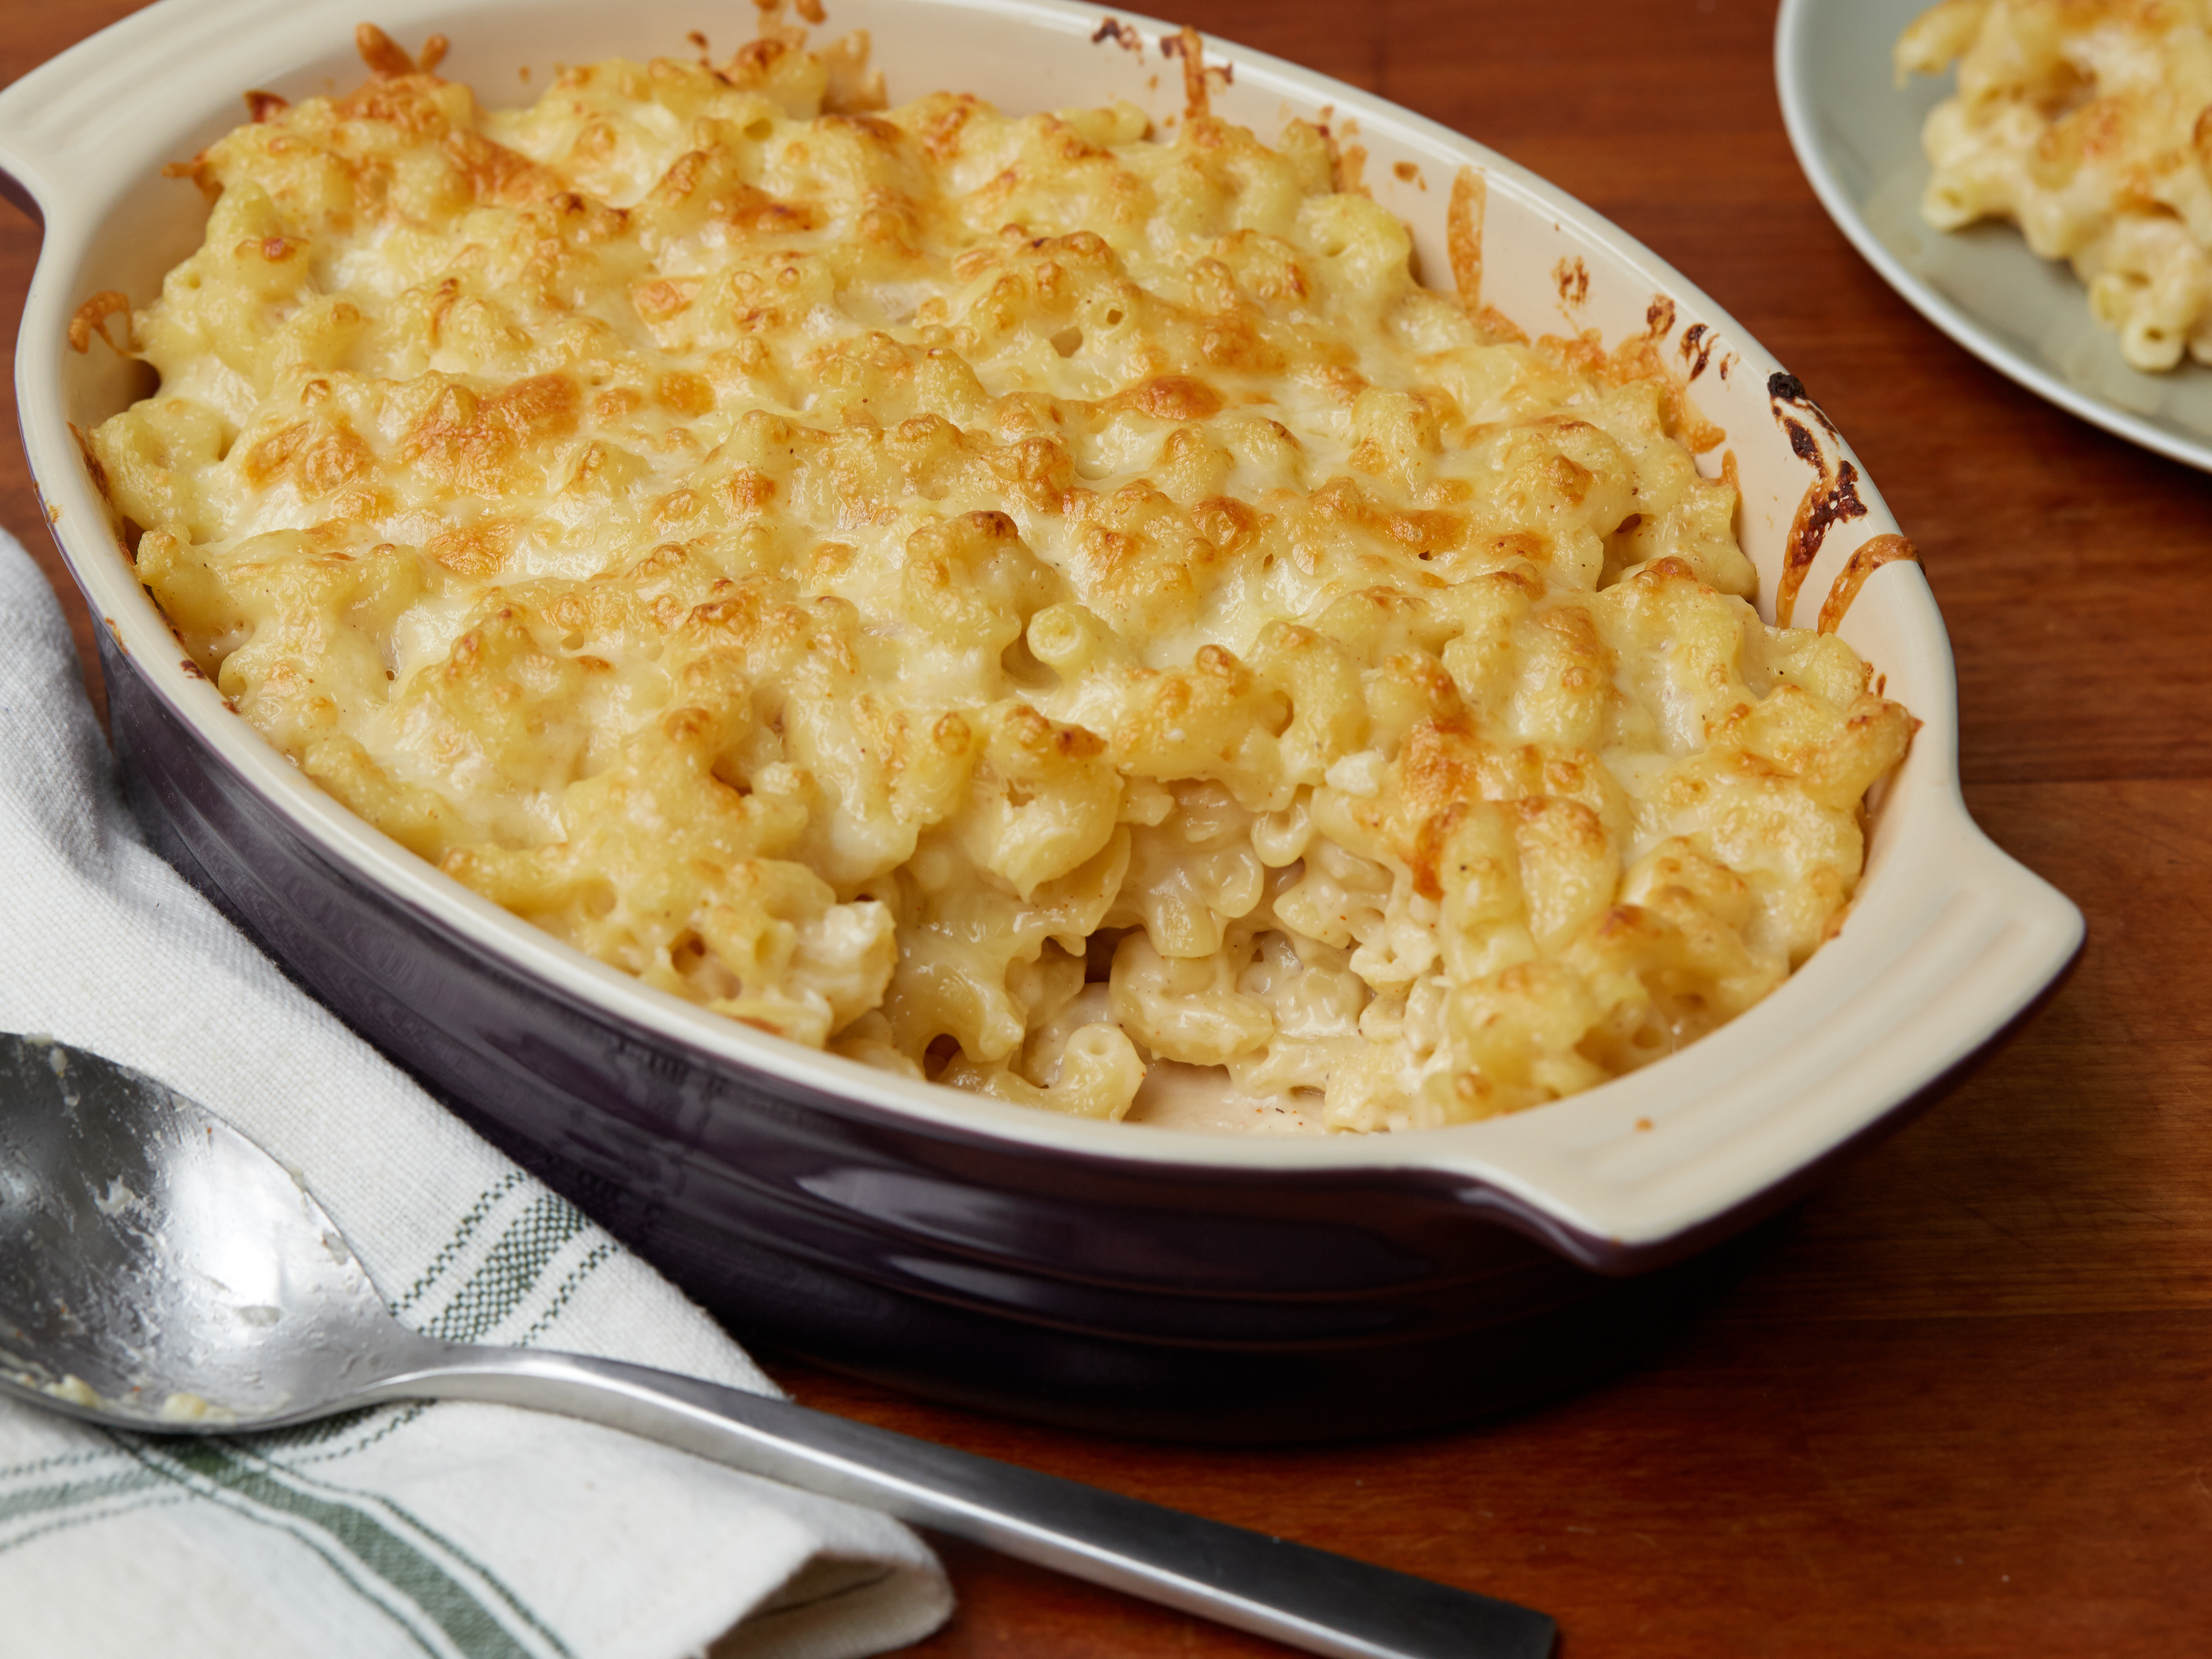 sharp white cheddar mac and cheese recipe not baked